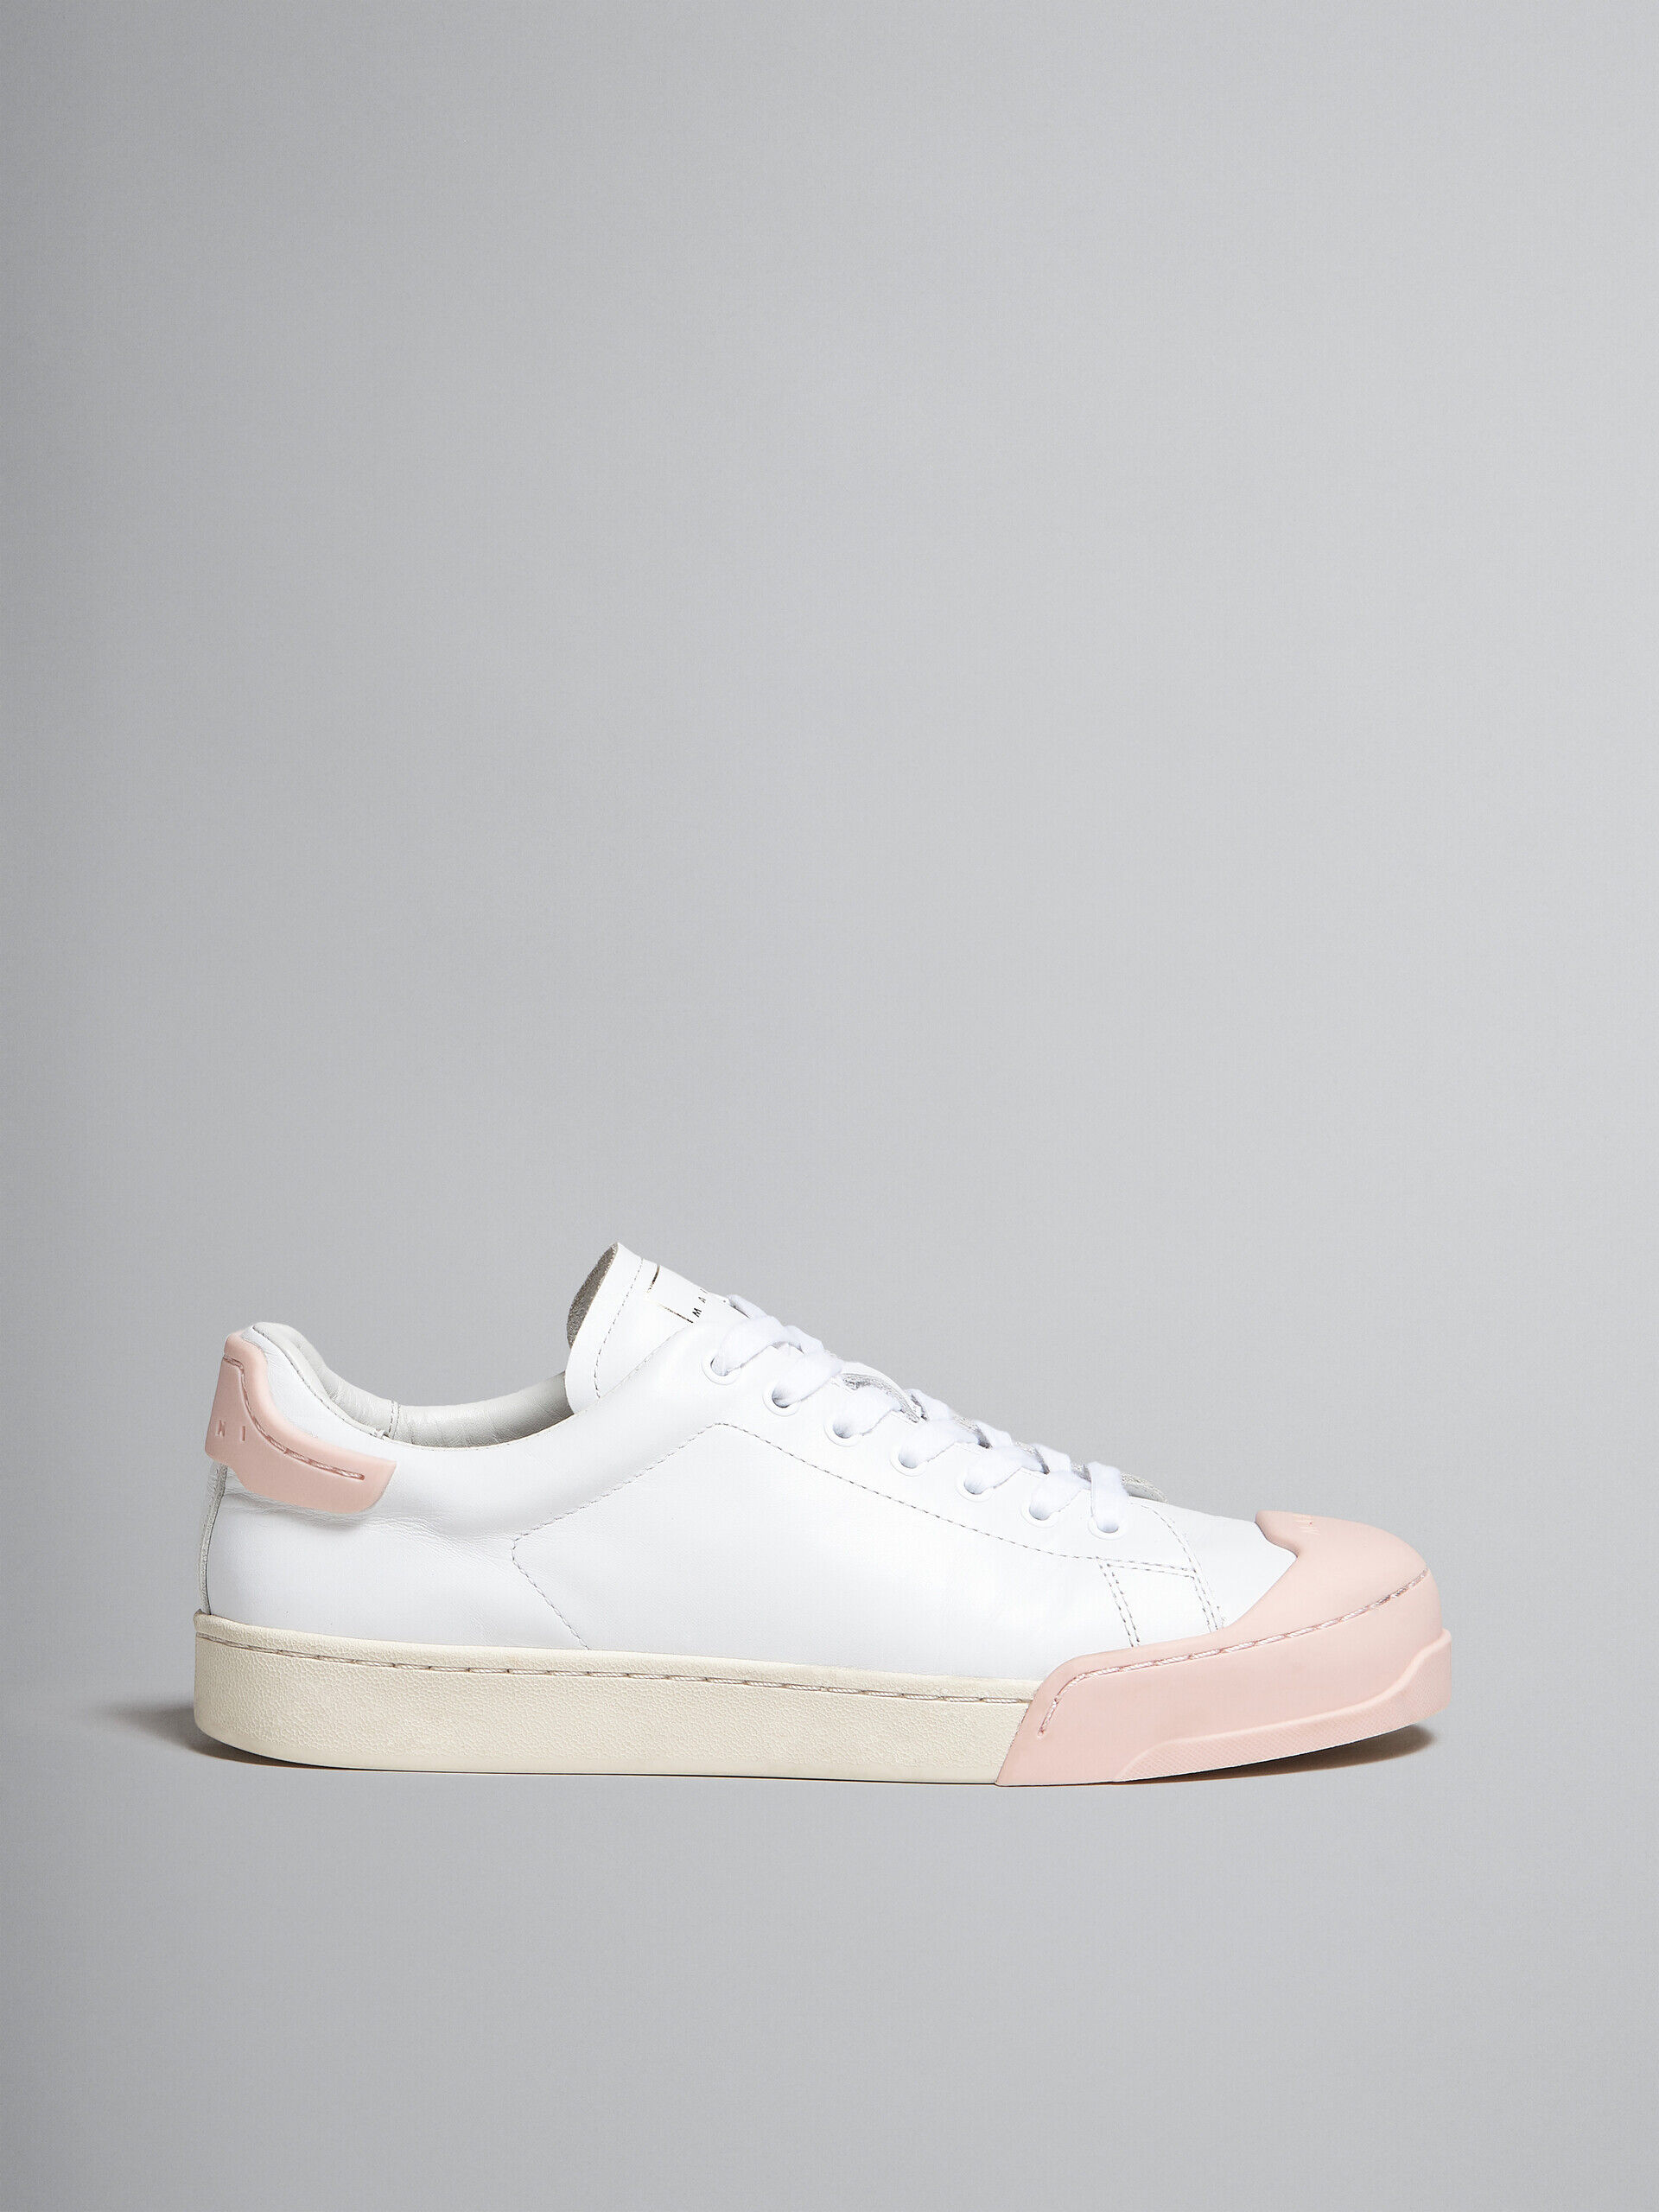 Dada Bumper sneaker in white and pink leather | Marni